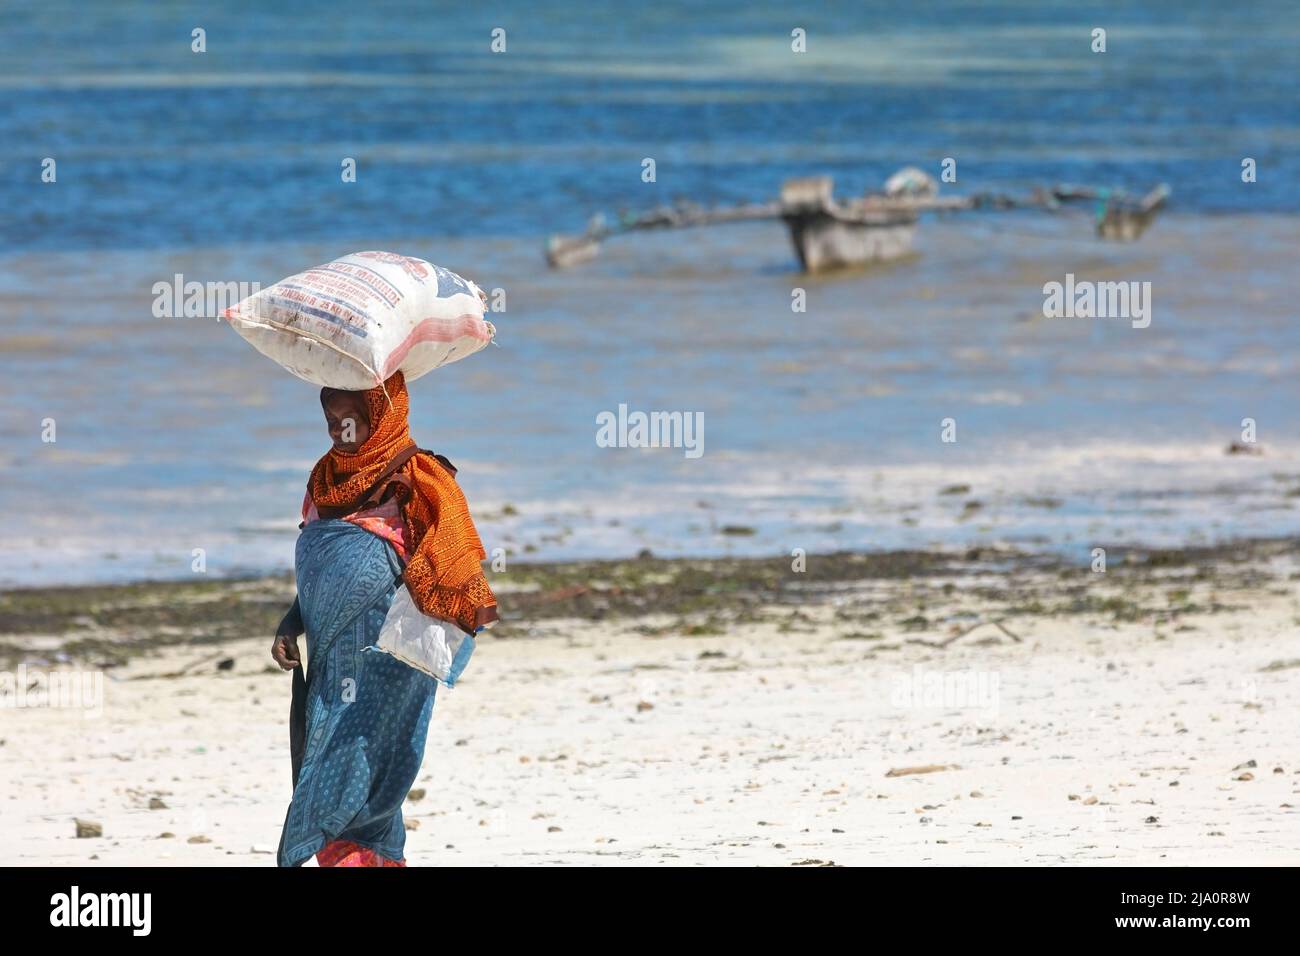 A woman carrying a sack of seaweed on her head at the Jambiani beach with a traditional 'Ngalawa' boat in the background, Zanzibar, Tanzania, Africa. Stock Photo